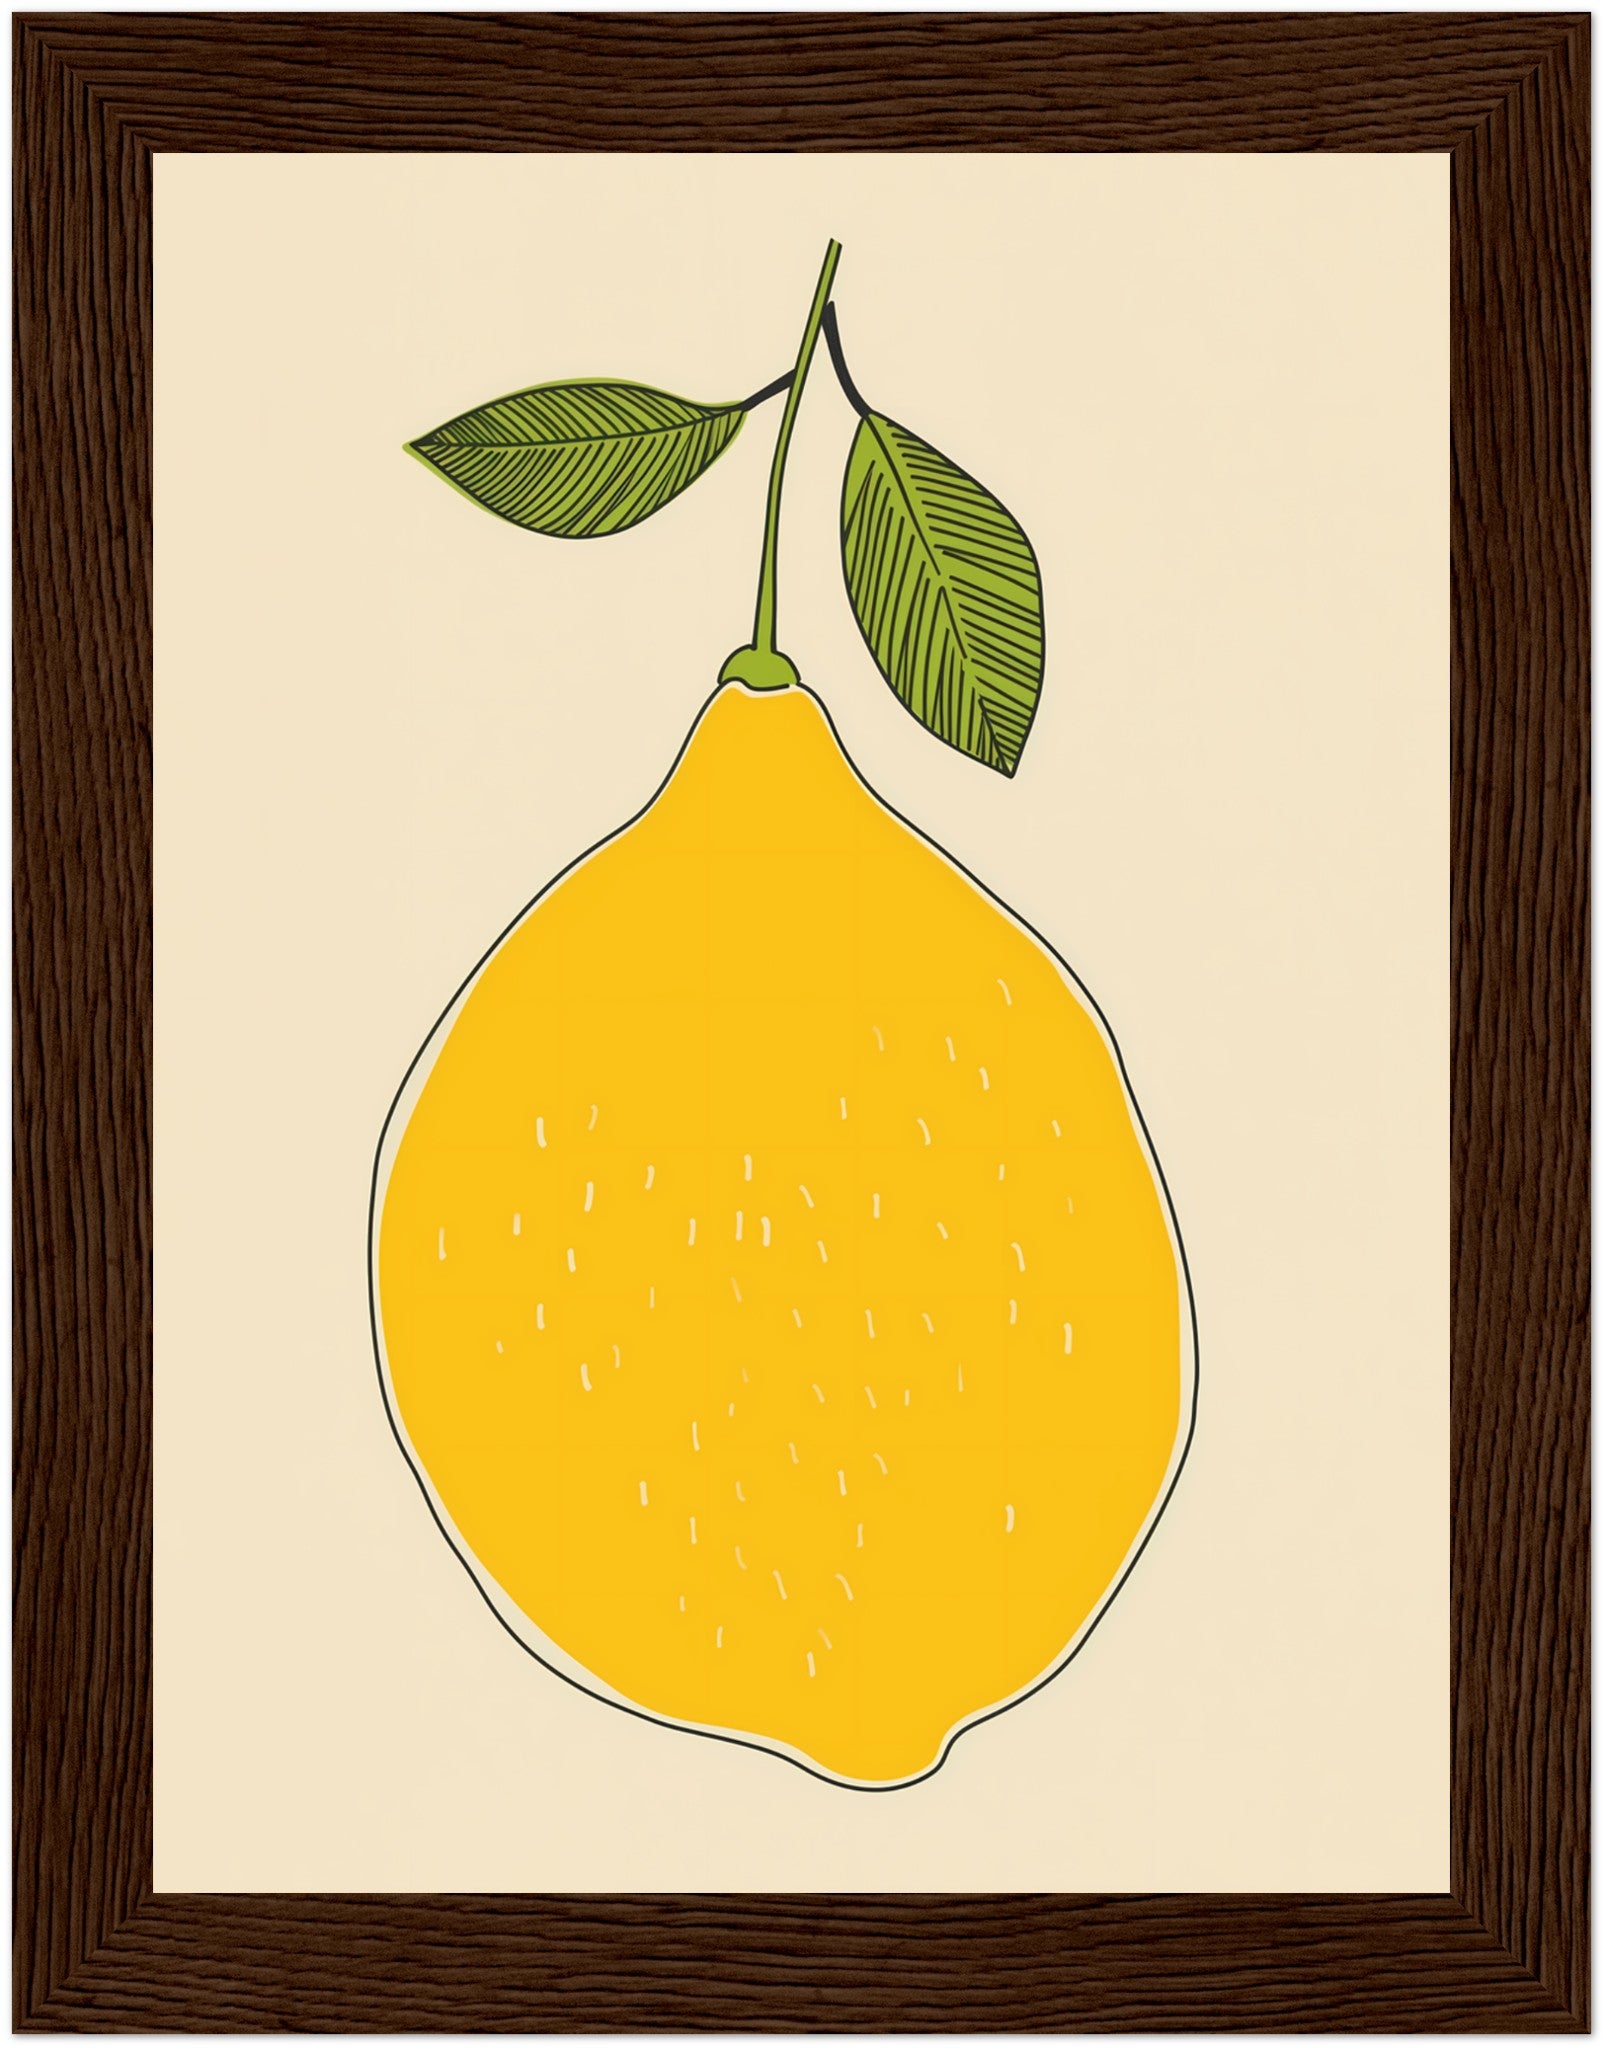 Illustration of a yellow pear with two green leaves on a light background, framed in brown.